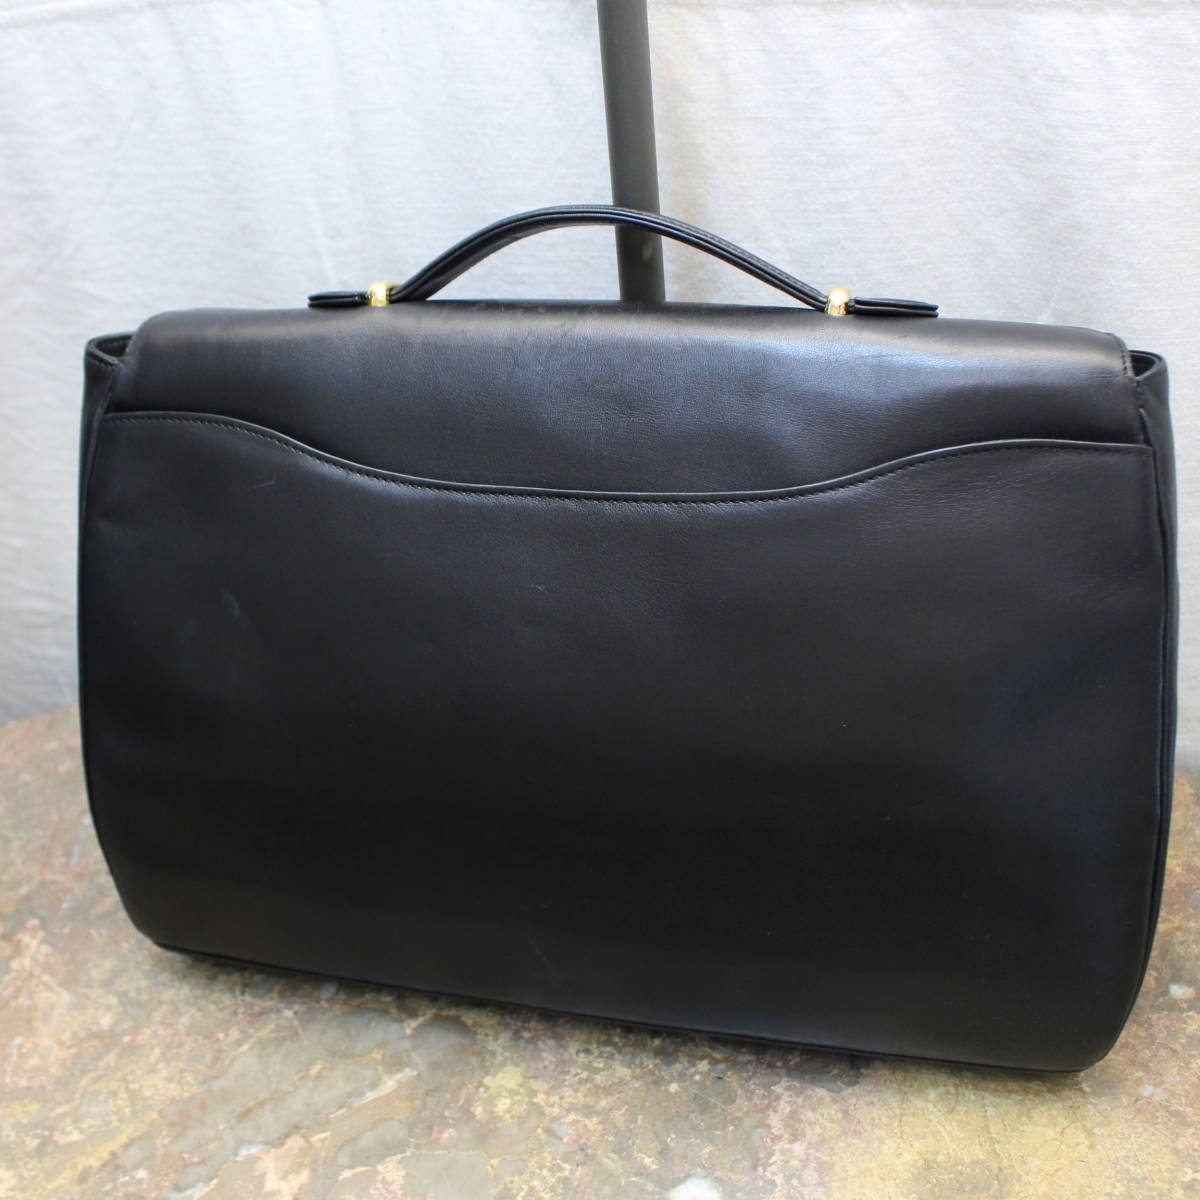 OLD Cartier LEATHER HAND BAG BUSINESS BAG MADE IN FRANCE/オールドカルティエレザーハンドバッグ(ビジネスバッグ)